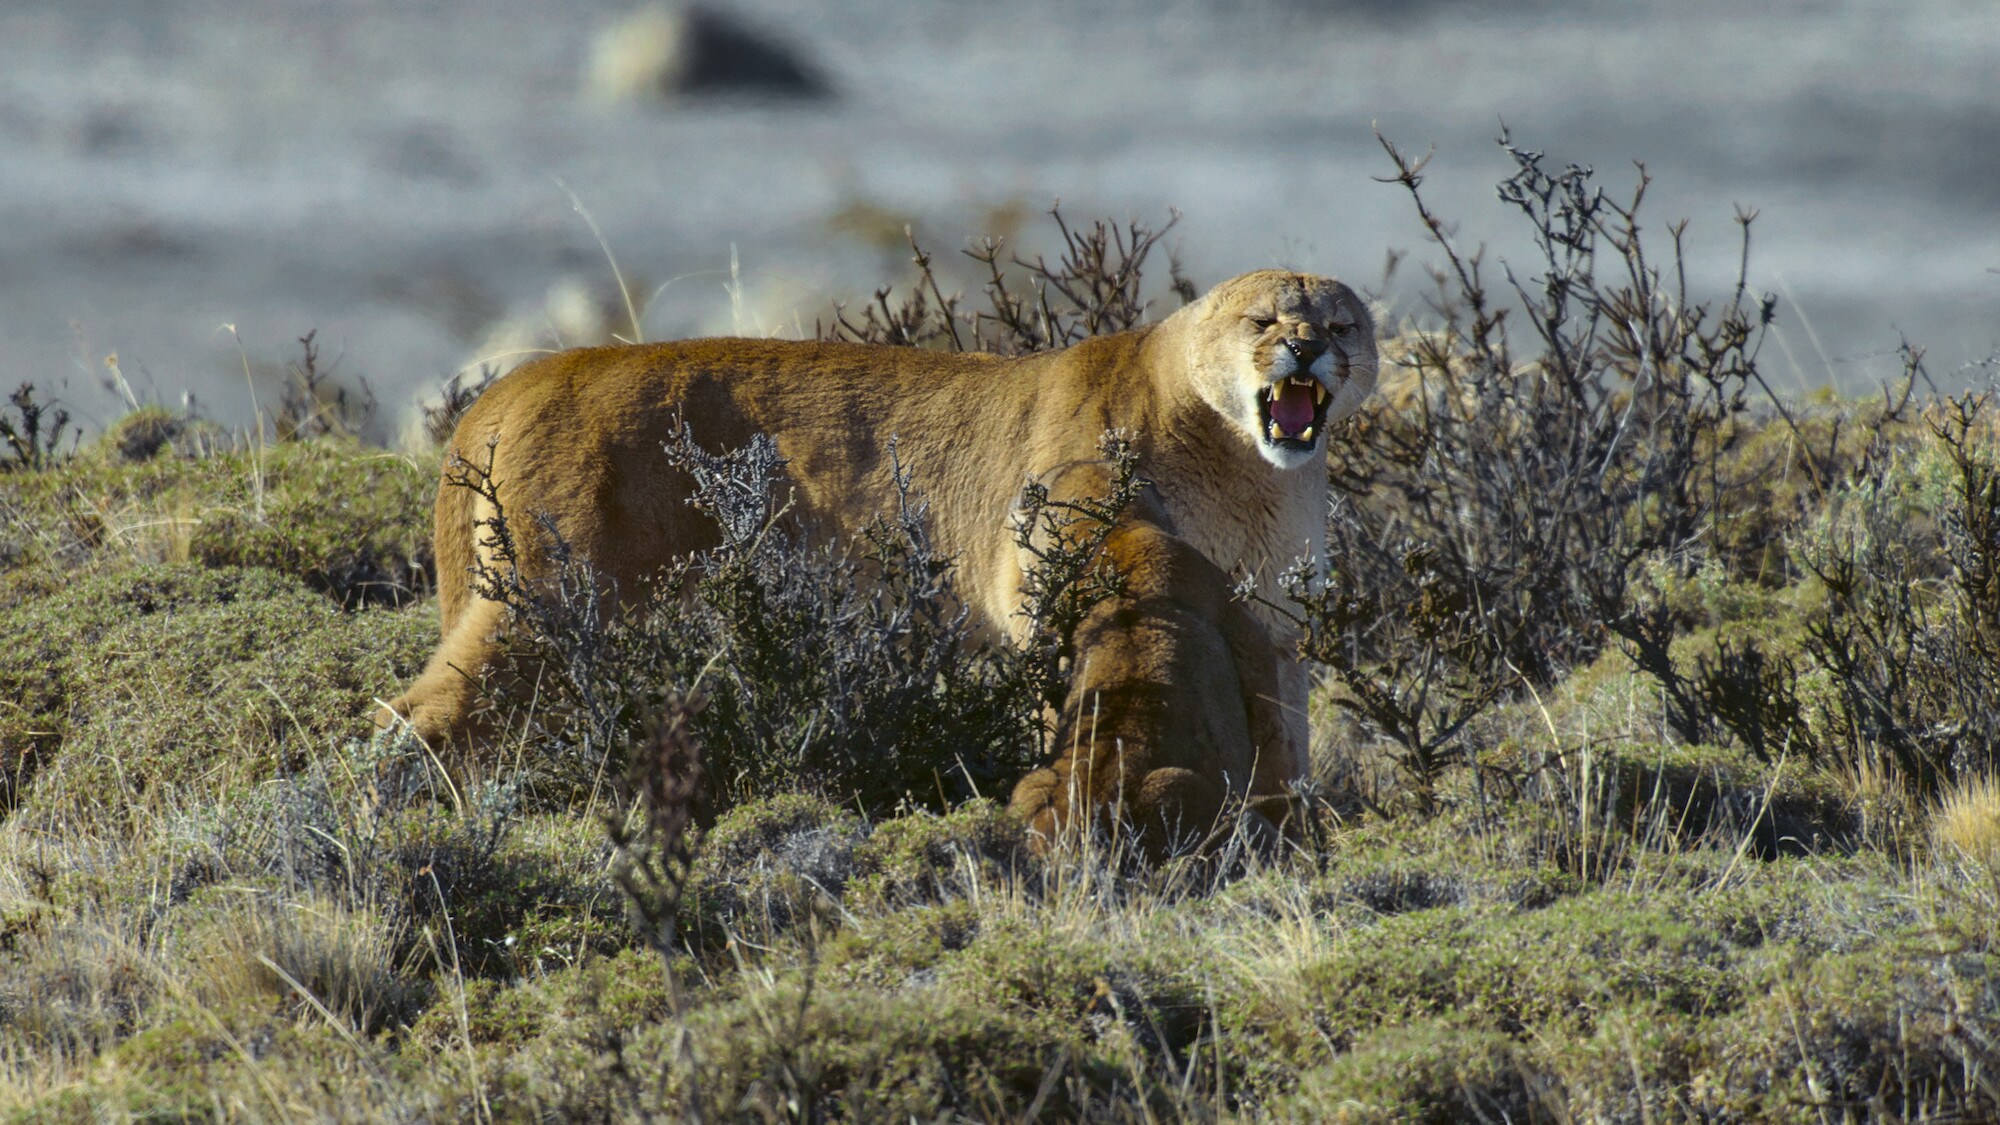 Mother puma and cub. (National Geographic for Disney+/Sam Stewart)